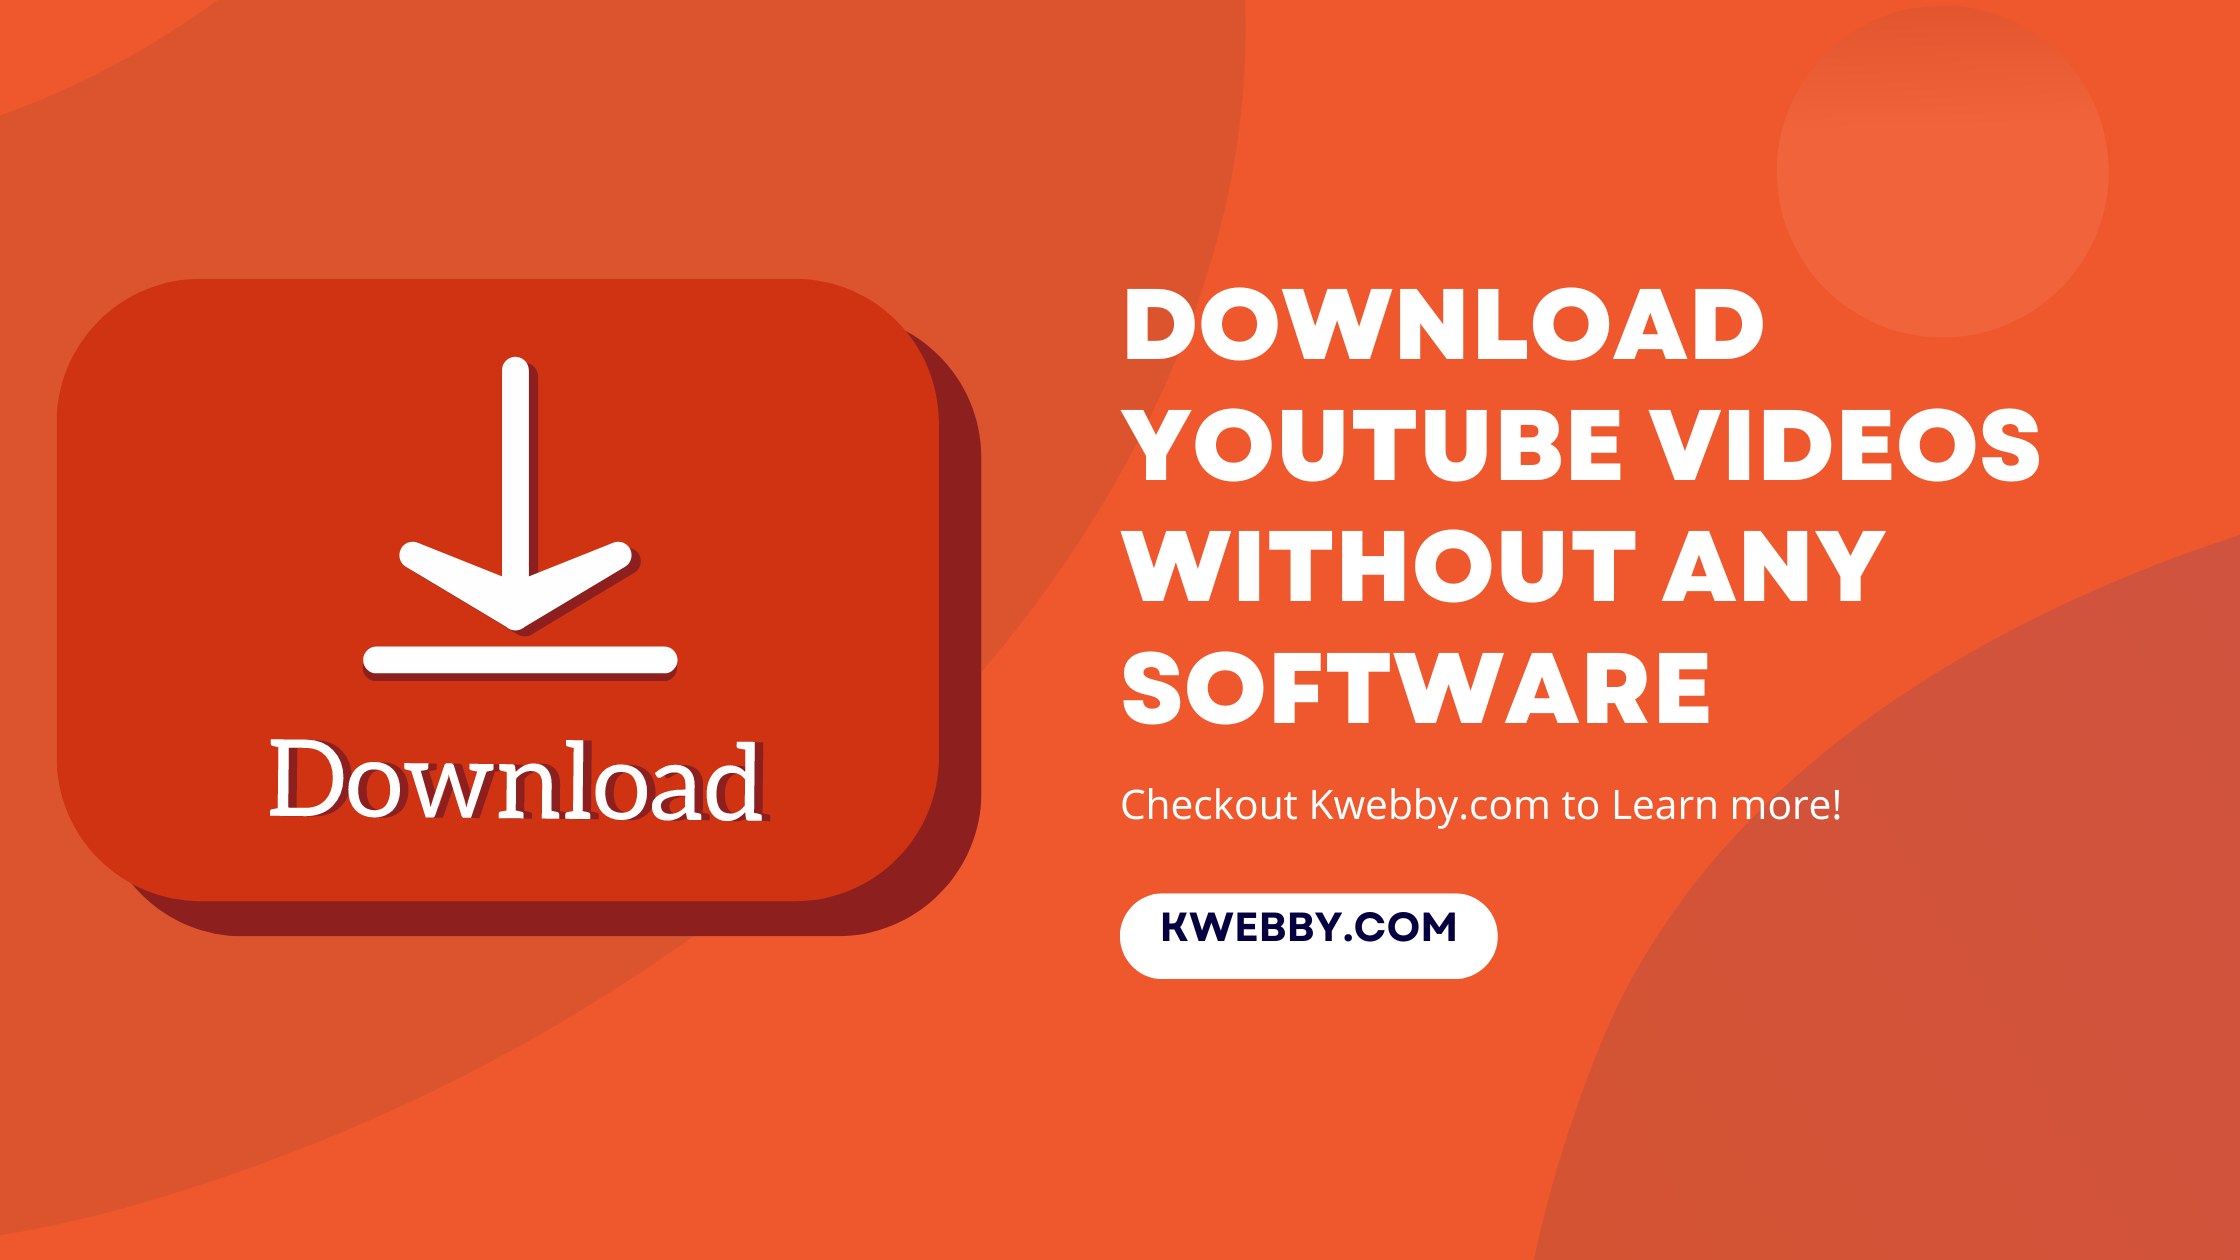 How to download YouTube videos without any software (4 Options)